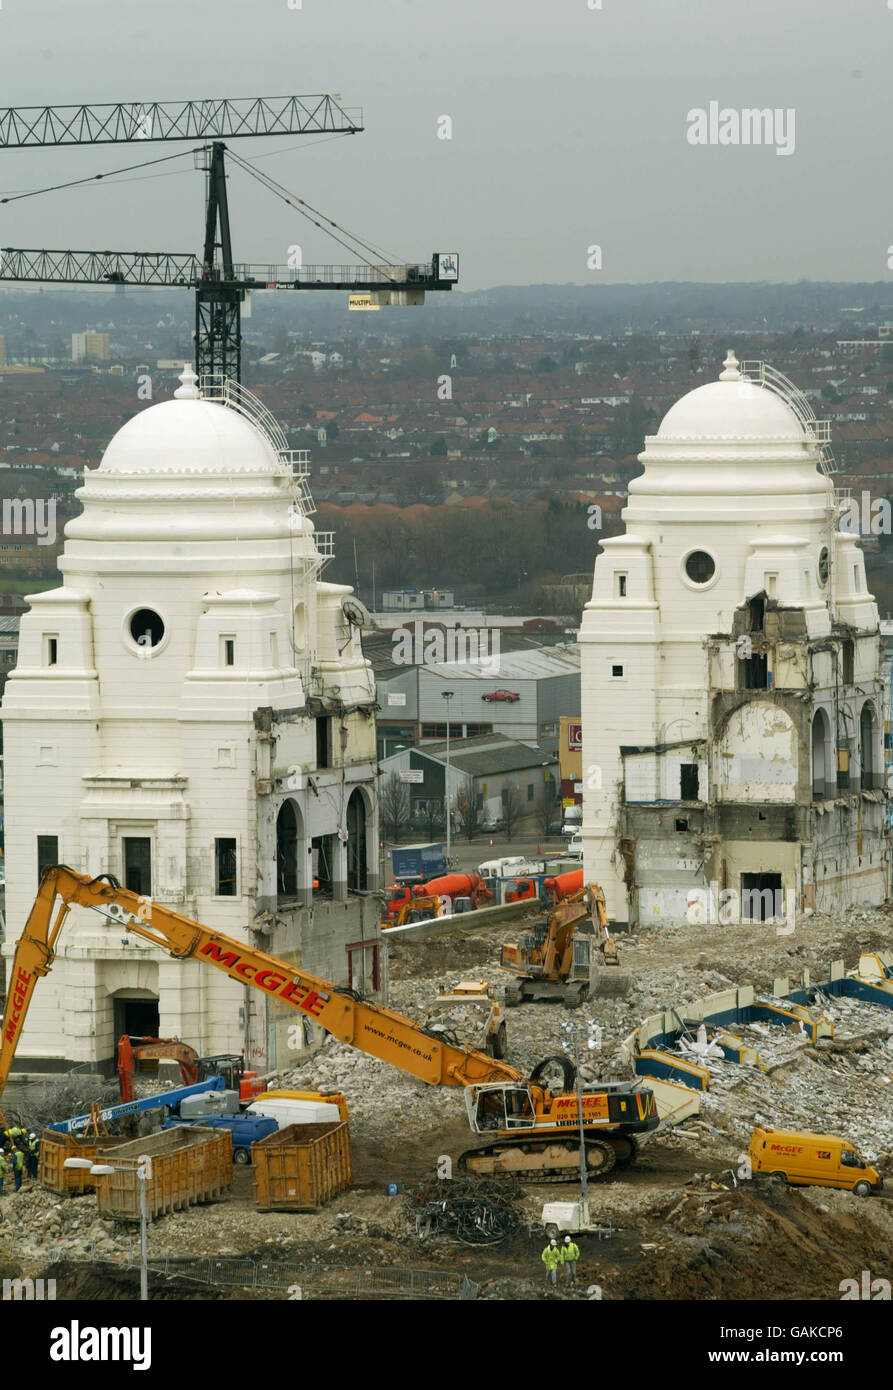 Soccer - Wembley Demolition. The famous towers of Wembley Stadium before their demolition Stock Photo